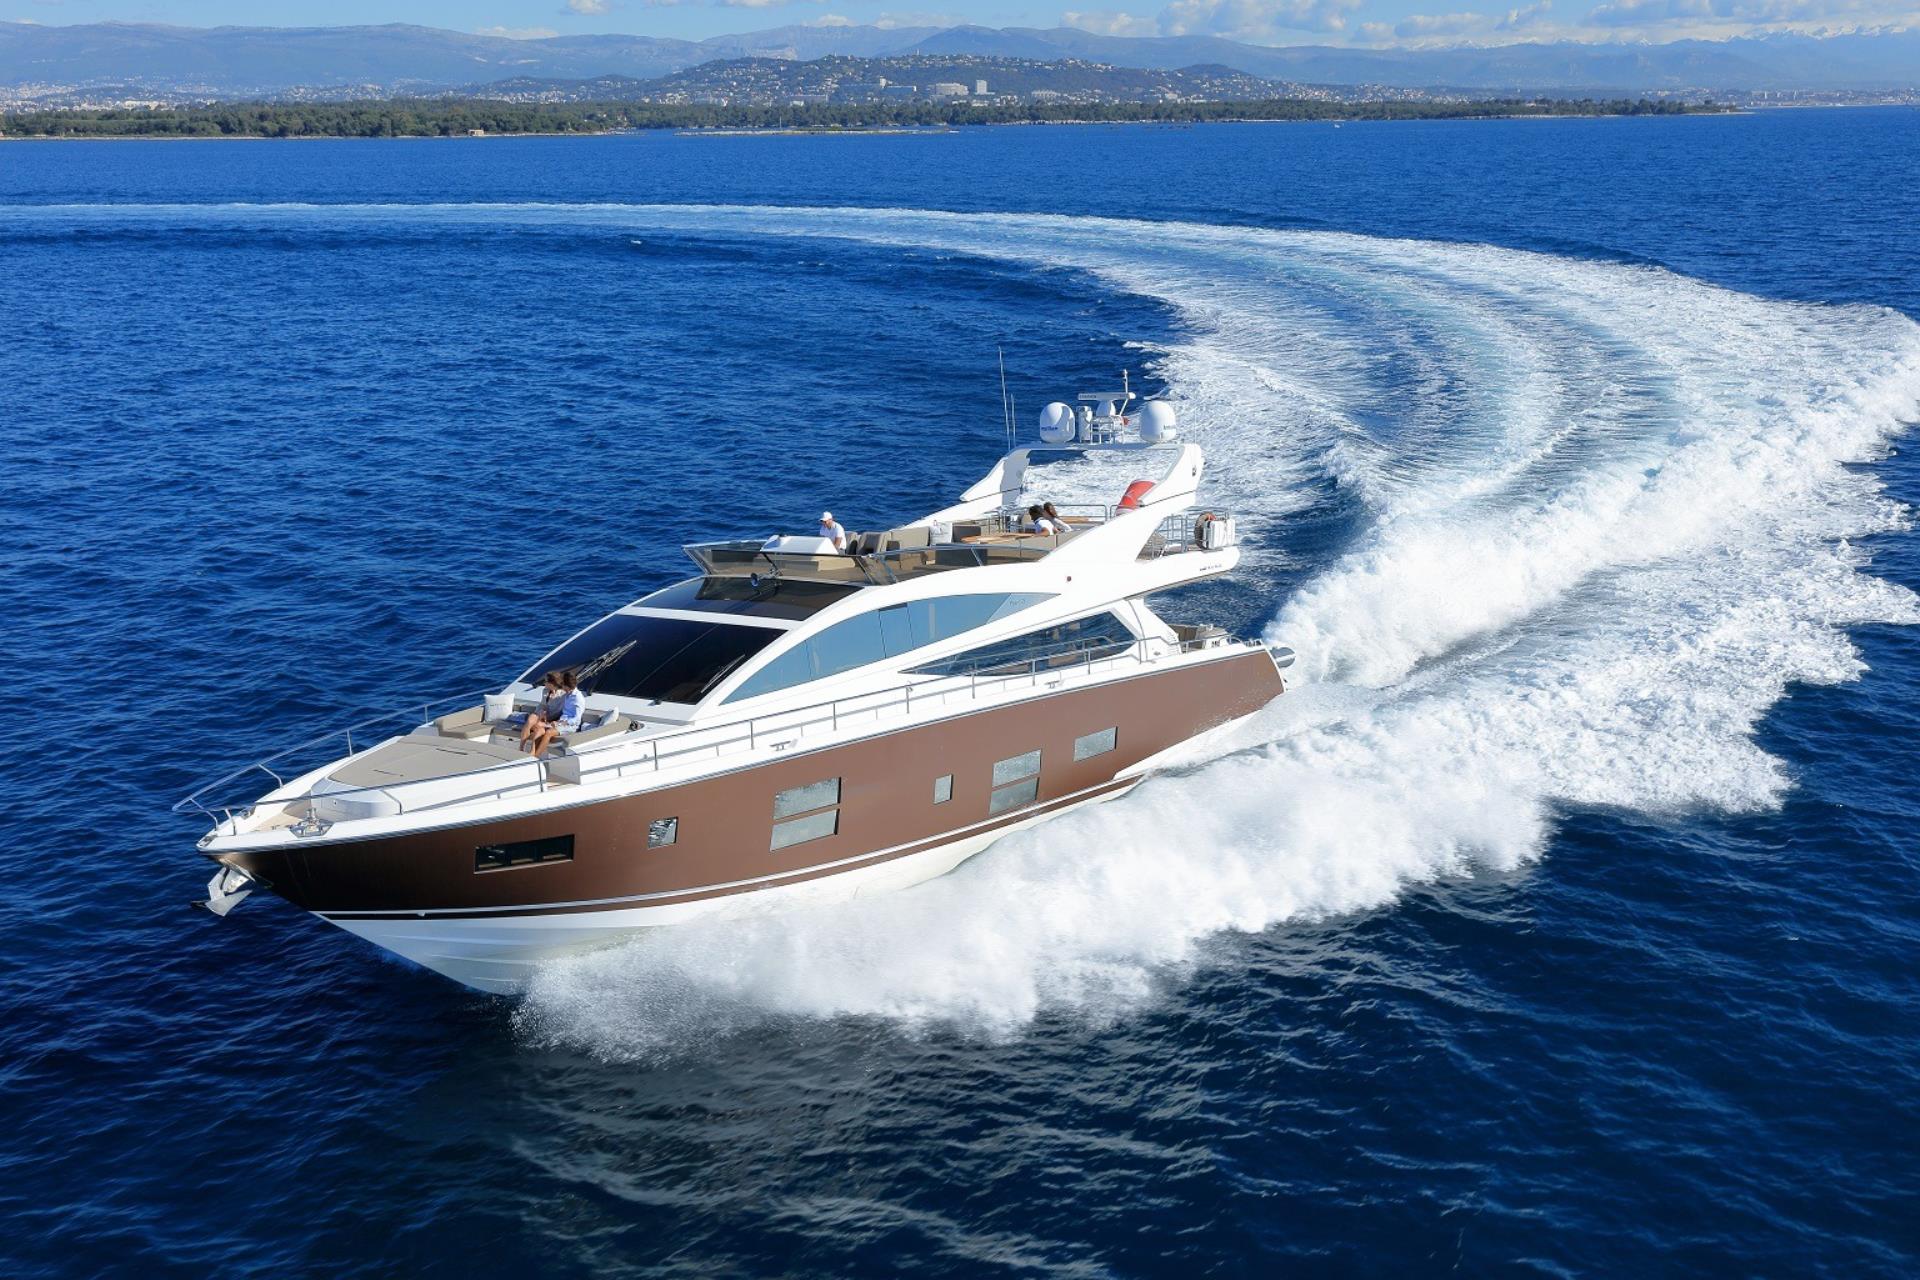 pearl 75 yacht price